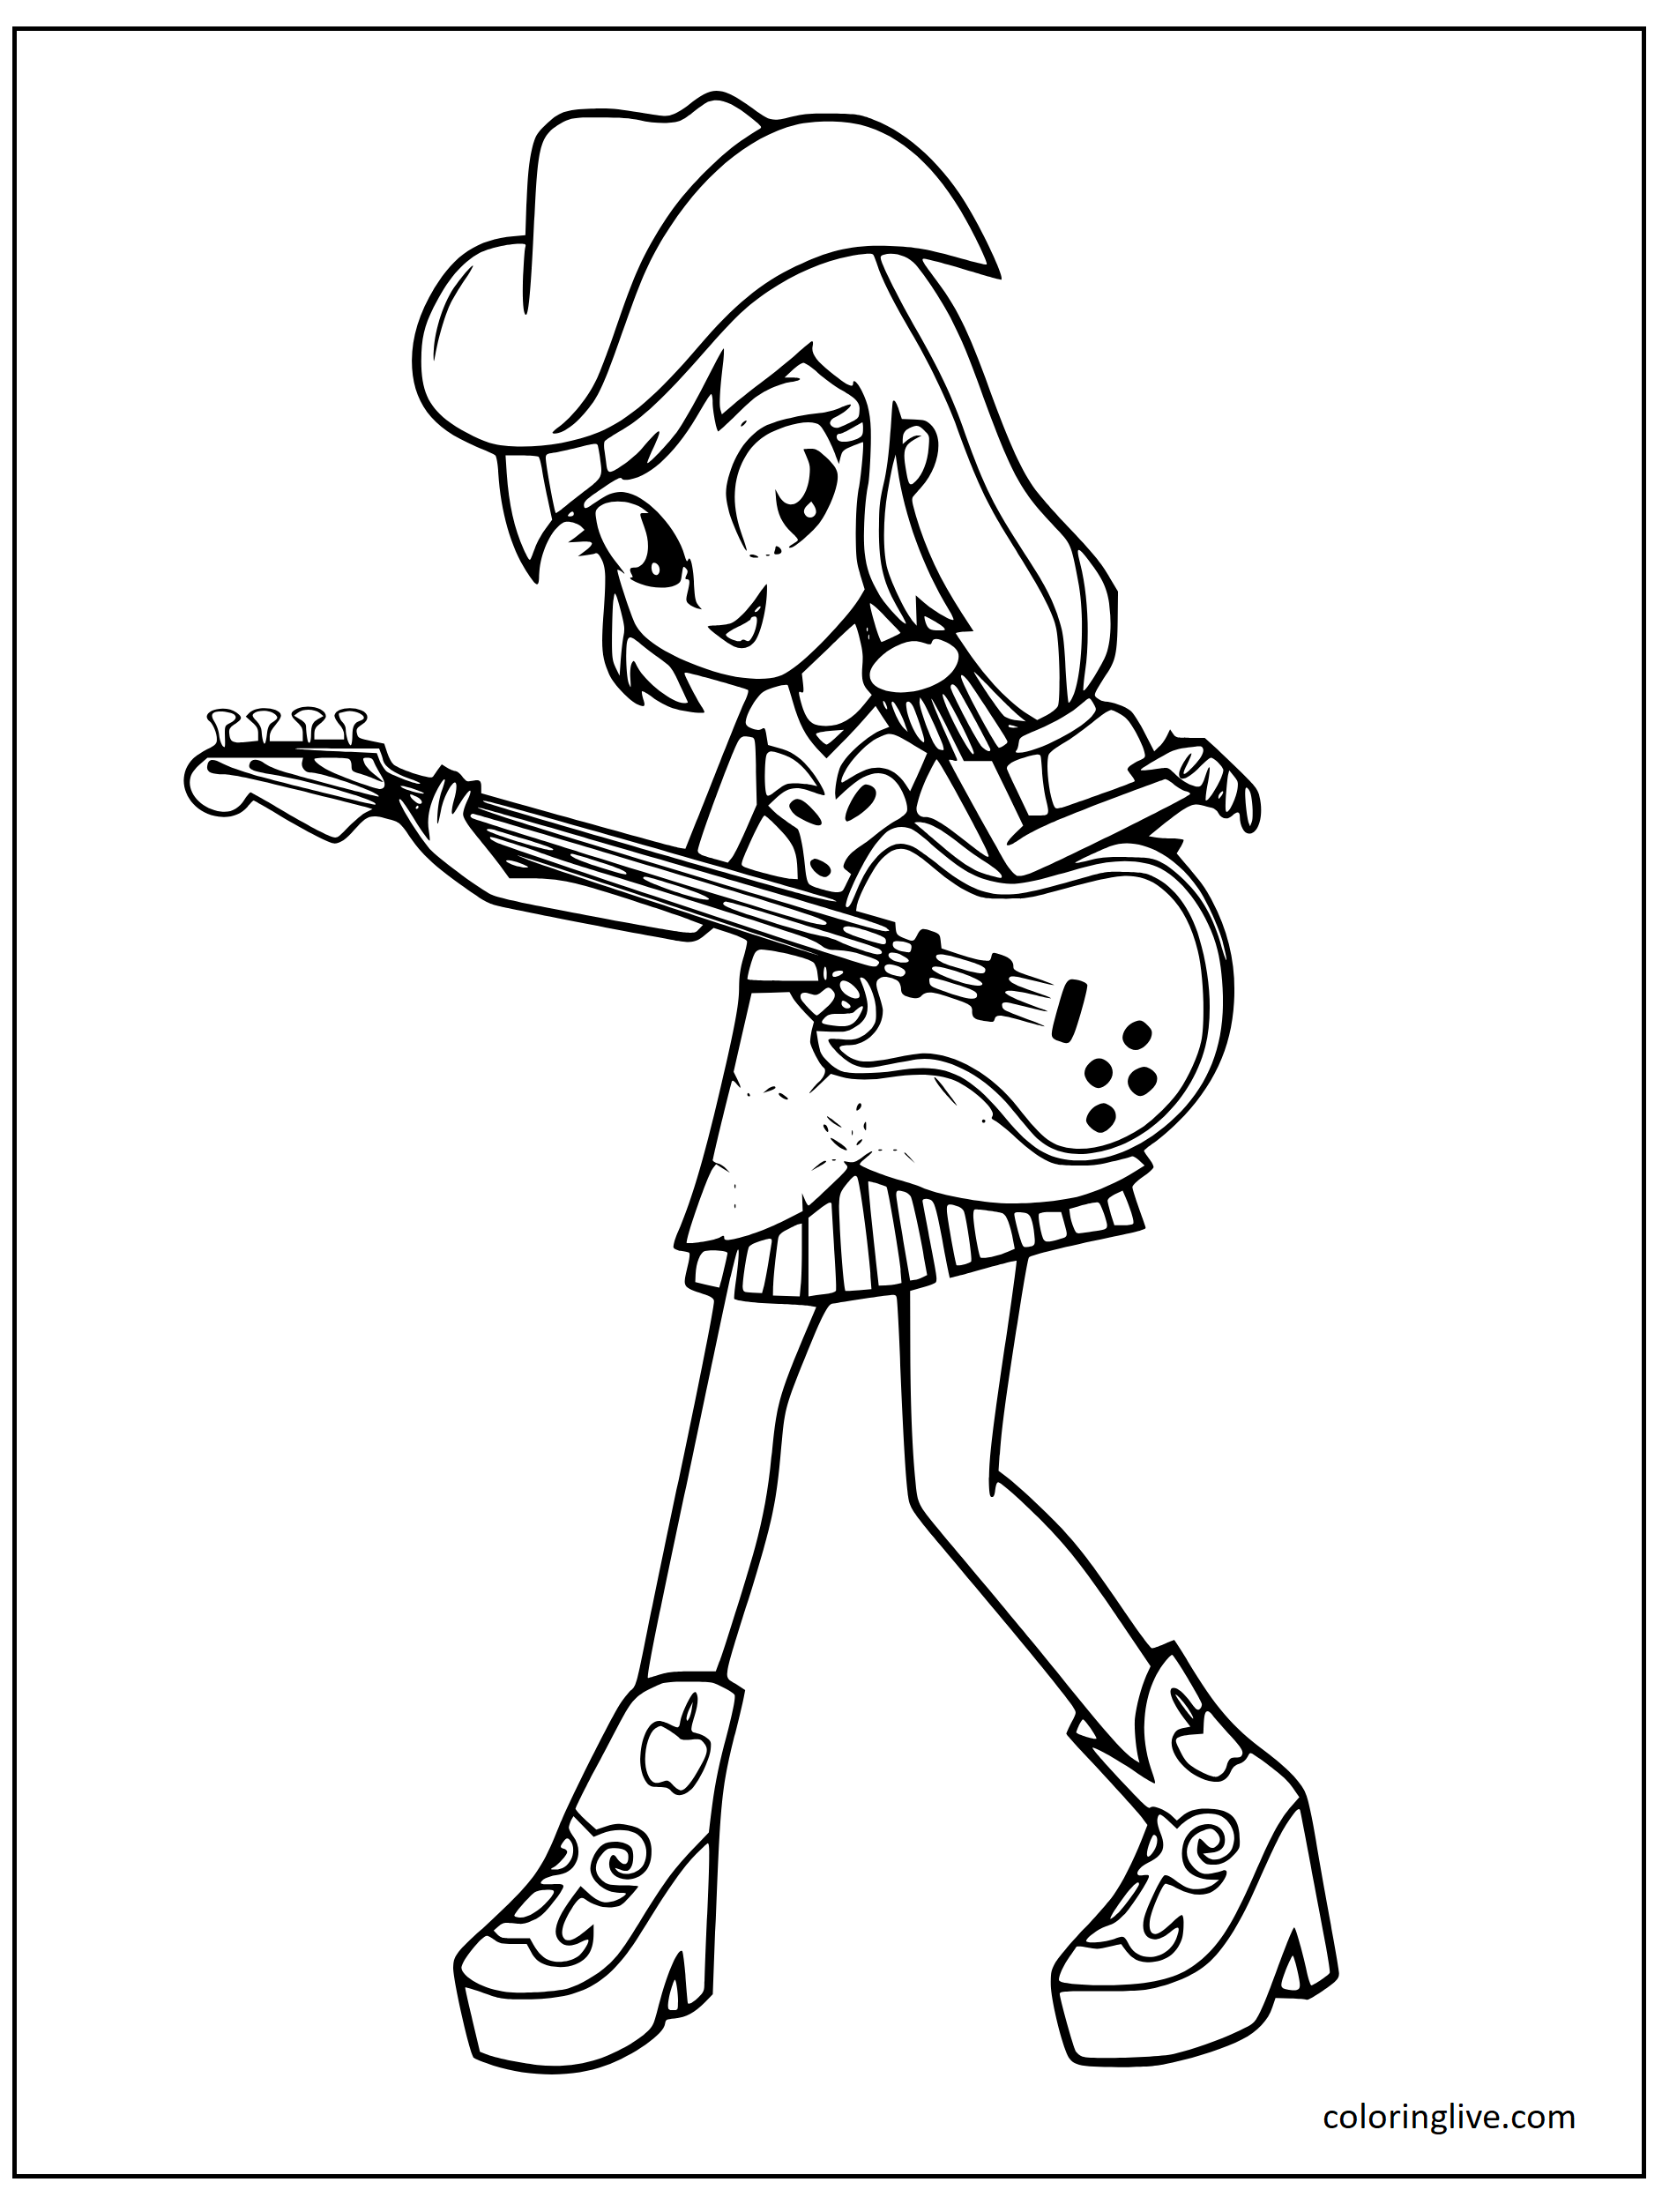 Printable Applejack the Equestria Girl Coloring Page for kids.